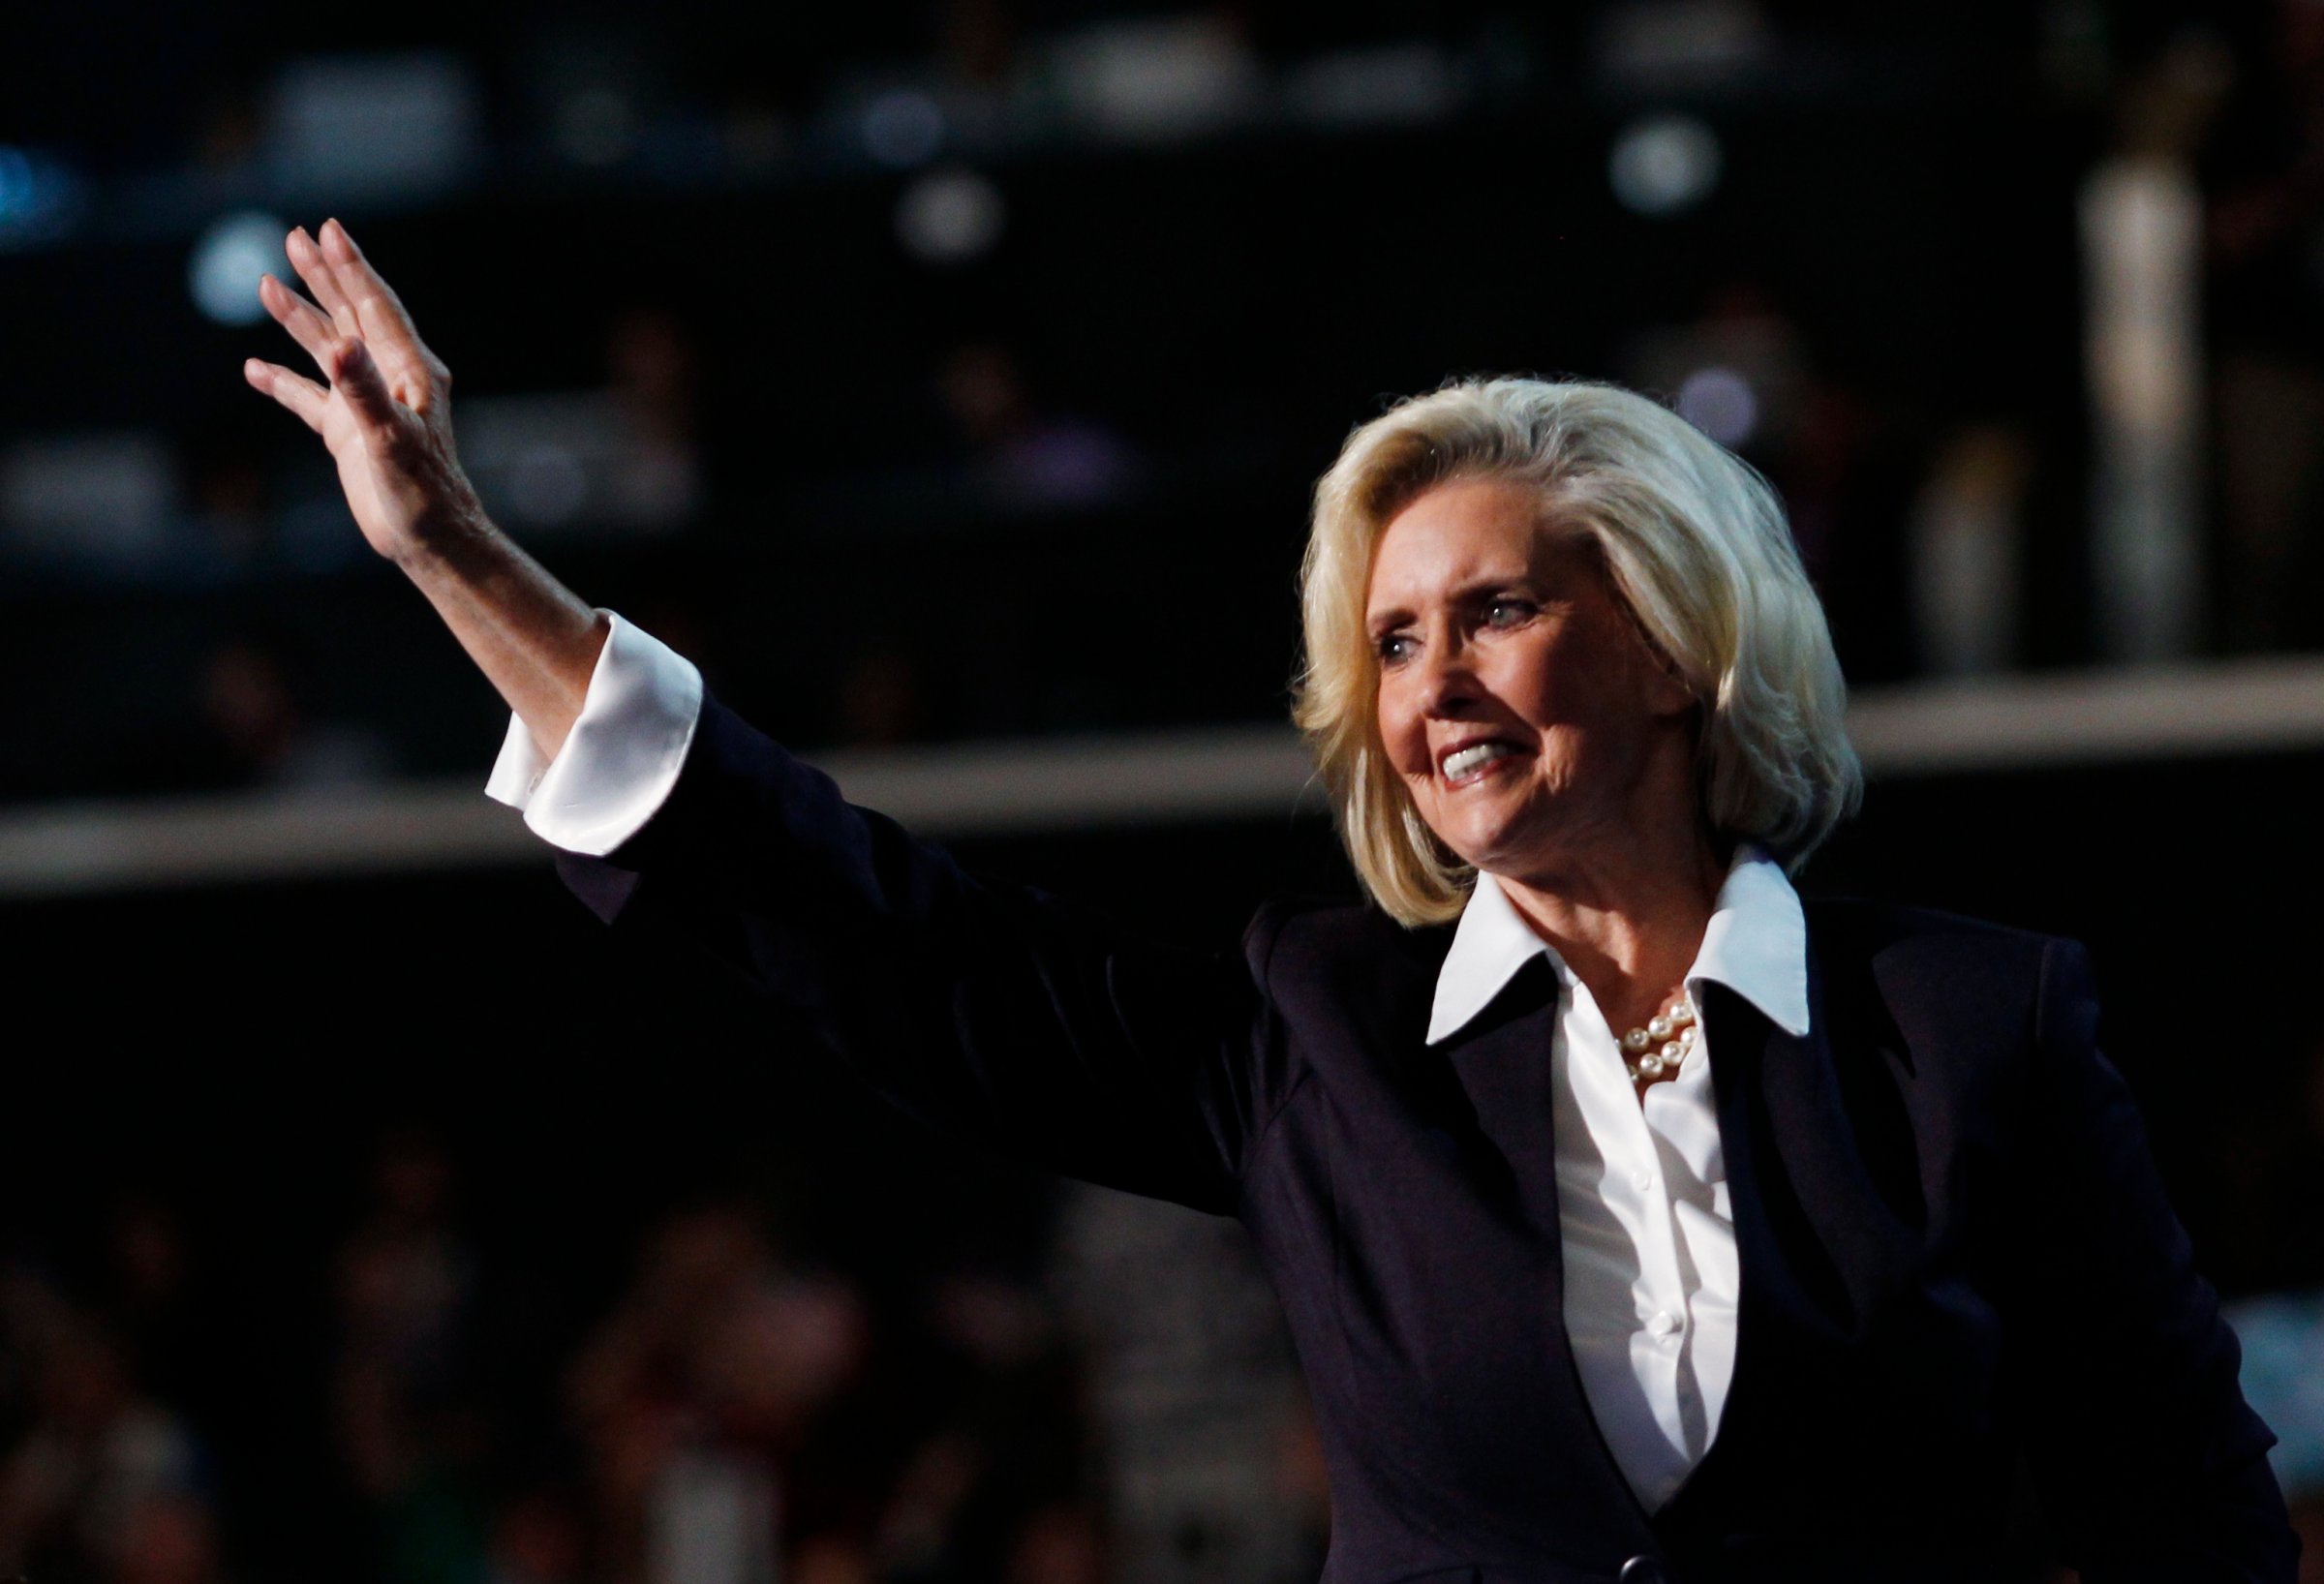 Women's rights leader Lilly Ledbetter, namesake of the Lilly Ledbetter Fair Pay Act, addresses the first session of the Democratic National Convention in Charlotte, N.C., on Sept. 4, 2012.